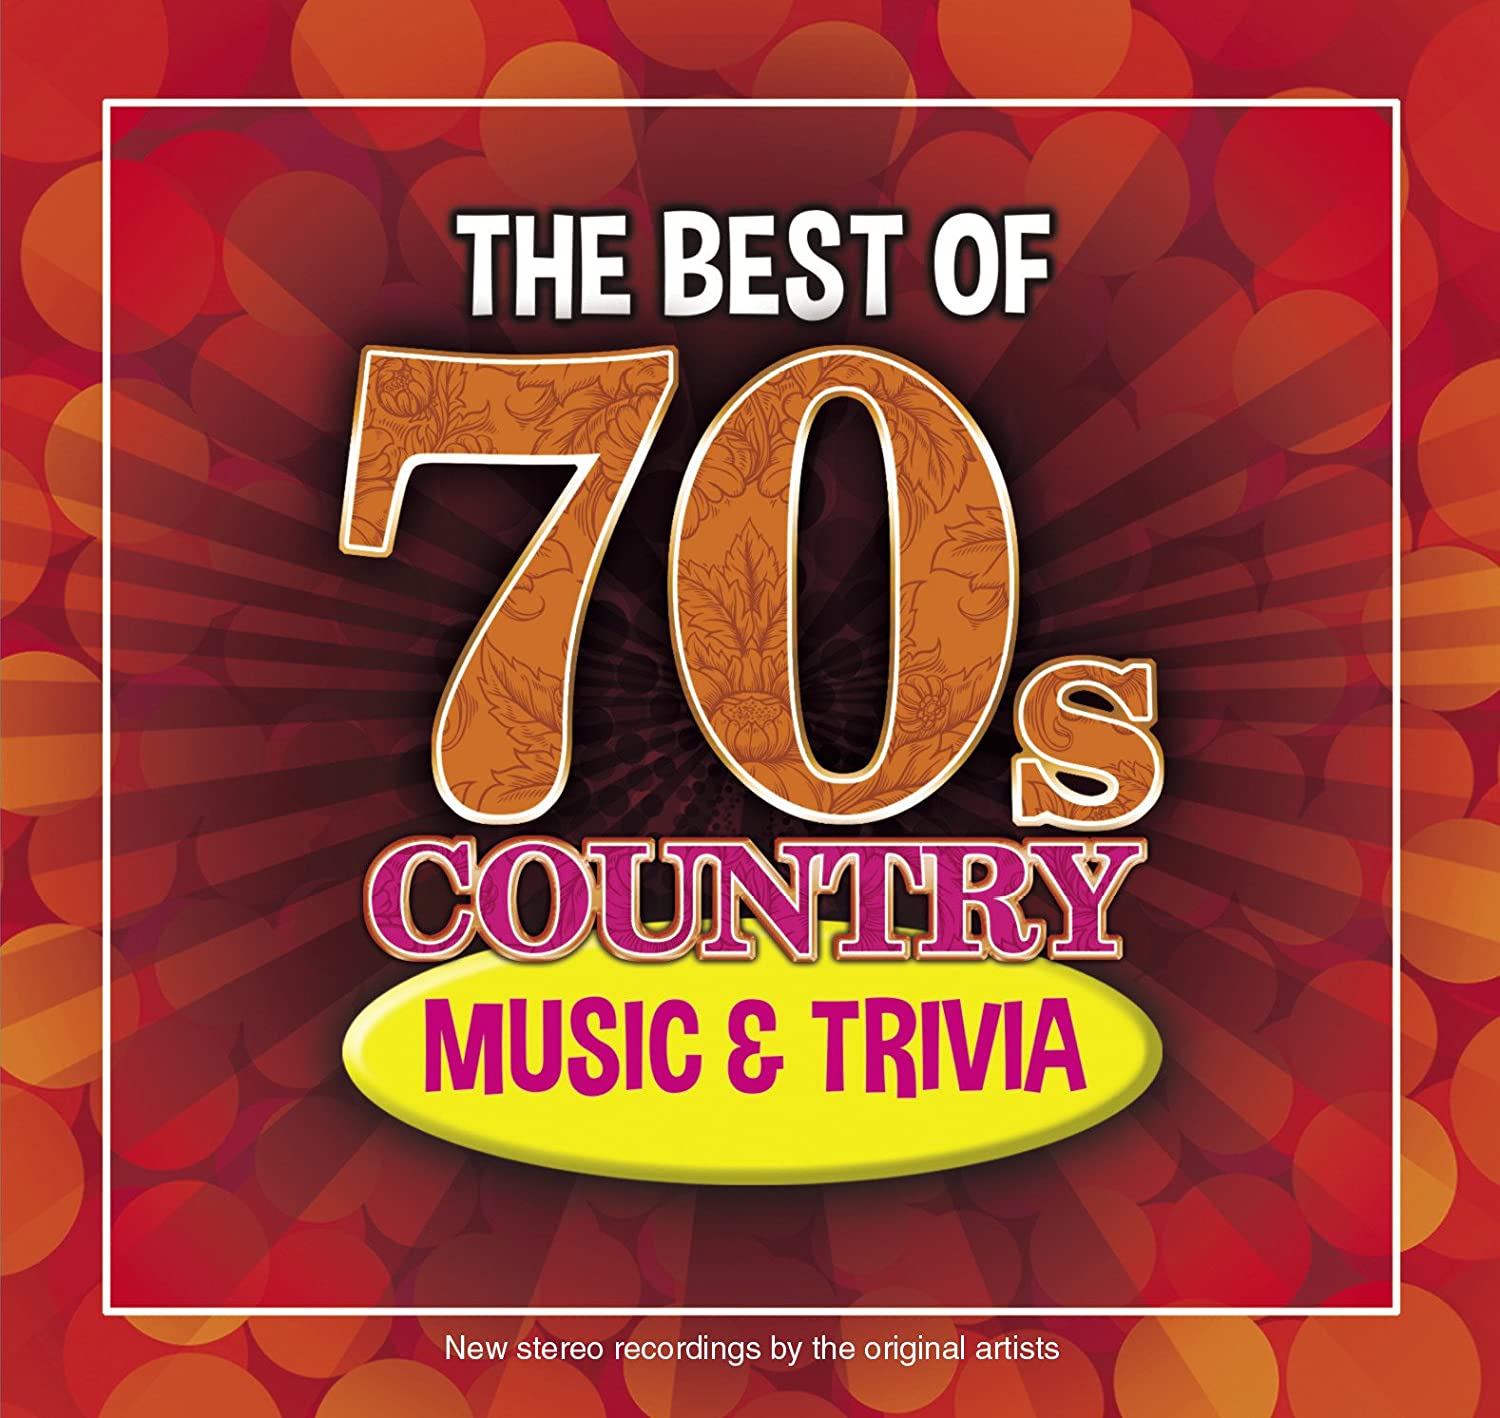 CD.The Best Of 70s Country Music and Trivia